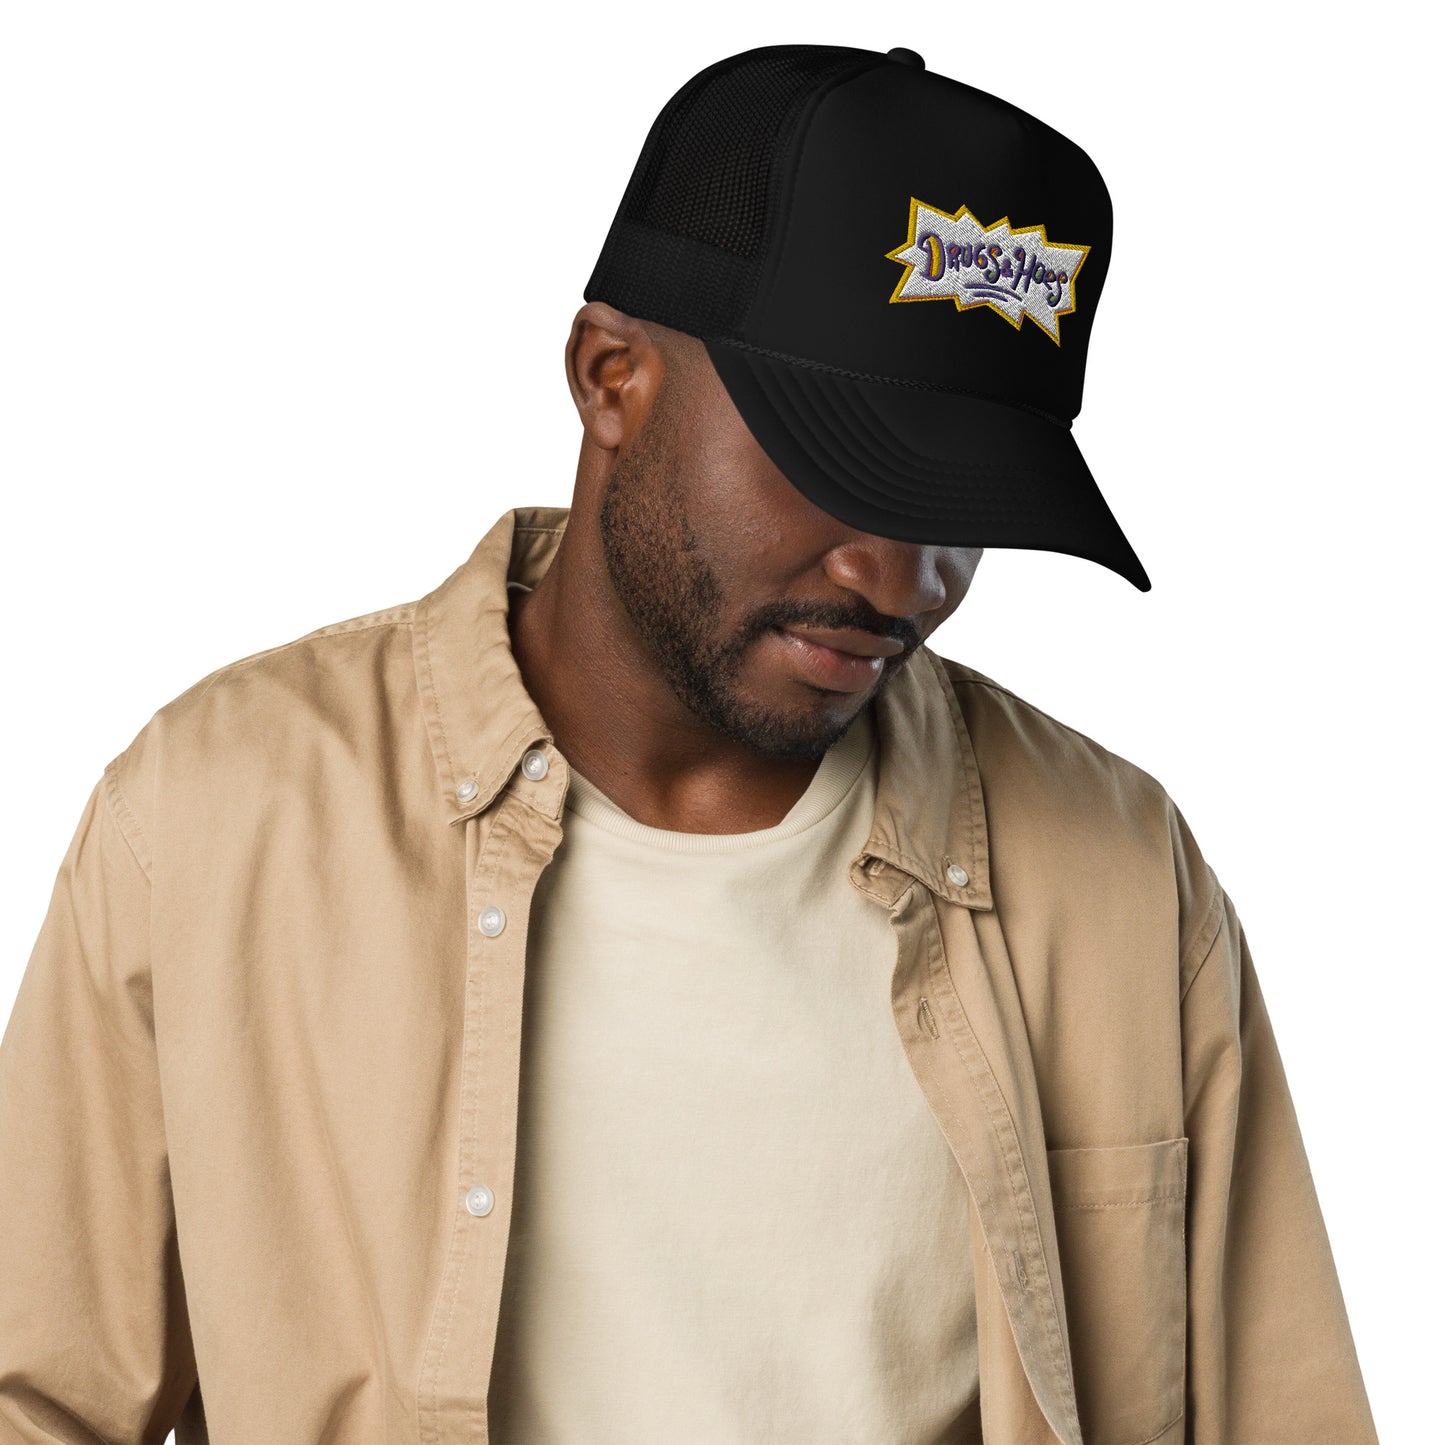 Drugz and Hoes Foam trucker hat